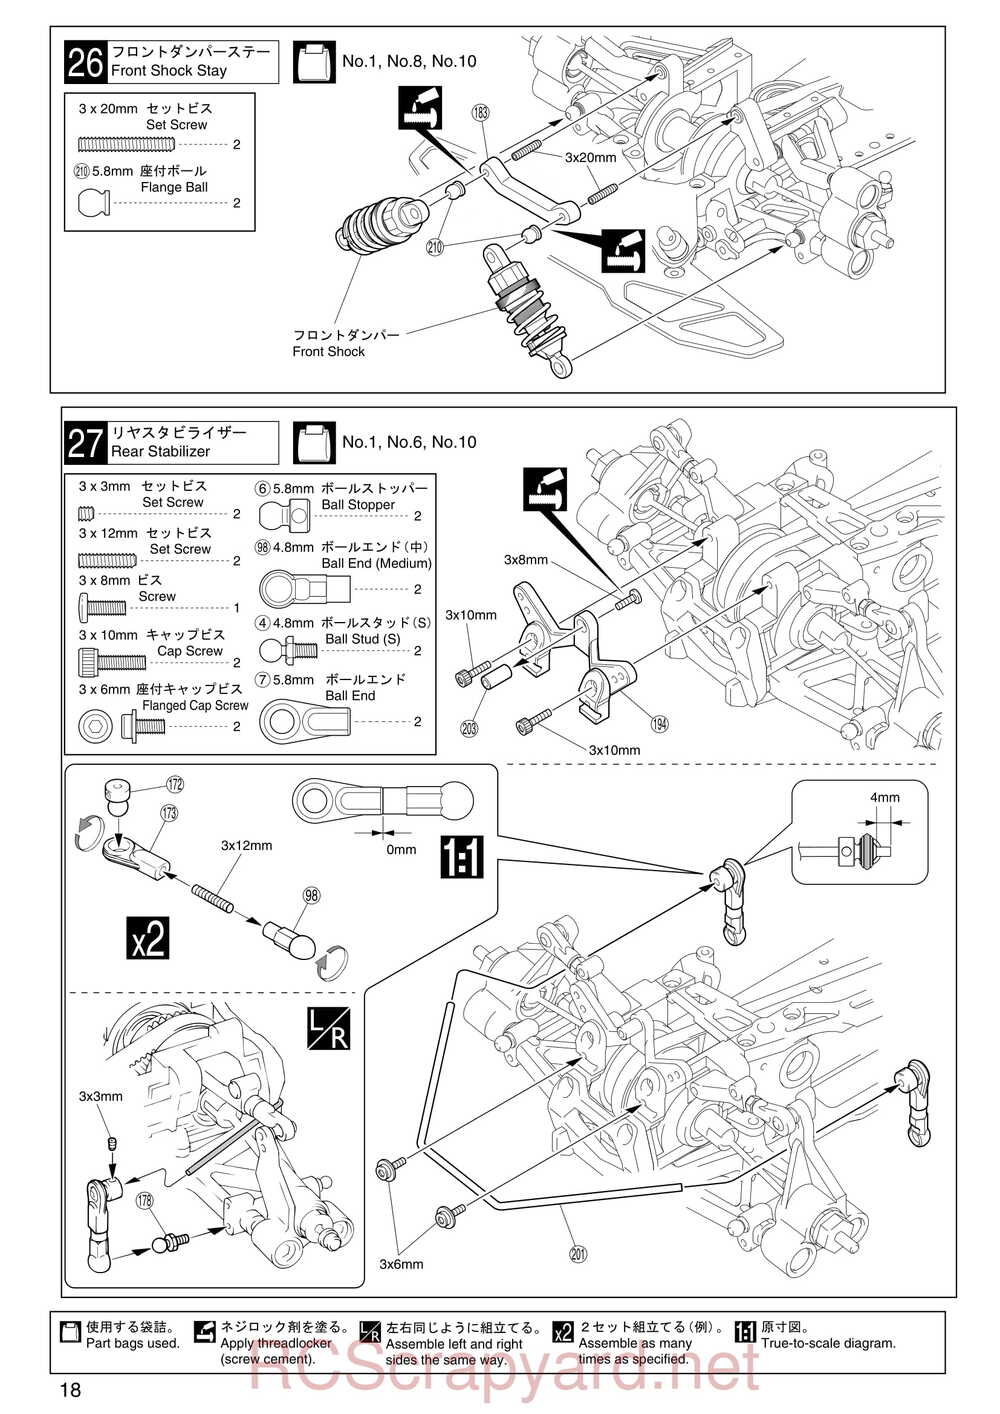 Kyosho - 31102 - V-One RR - Manual - Page 18